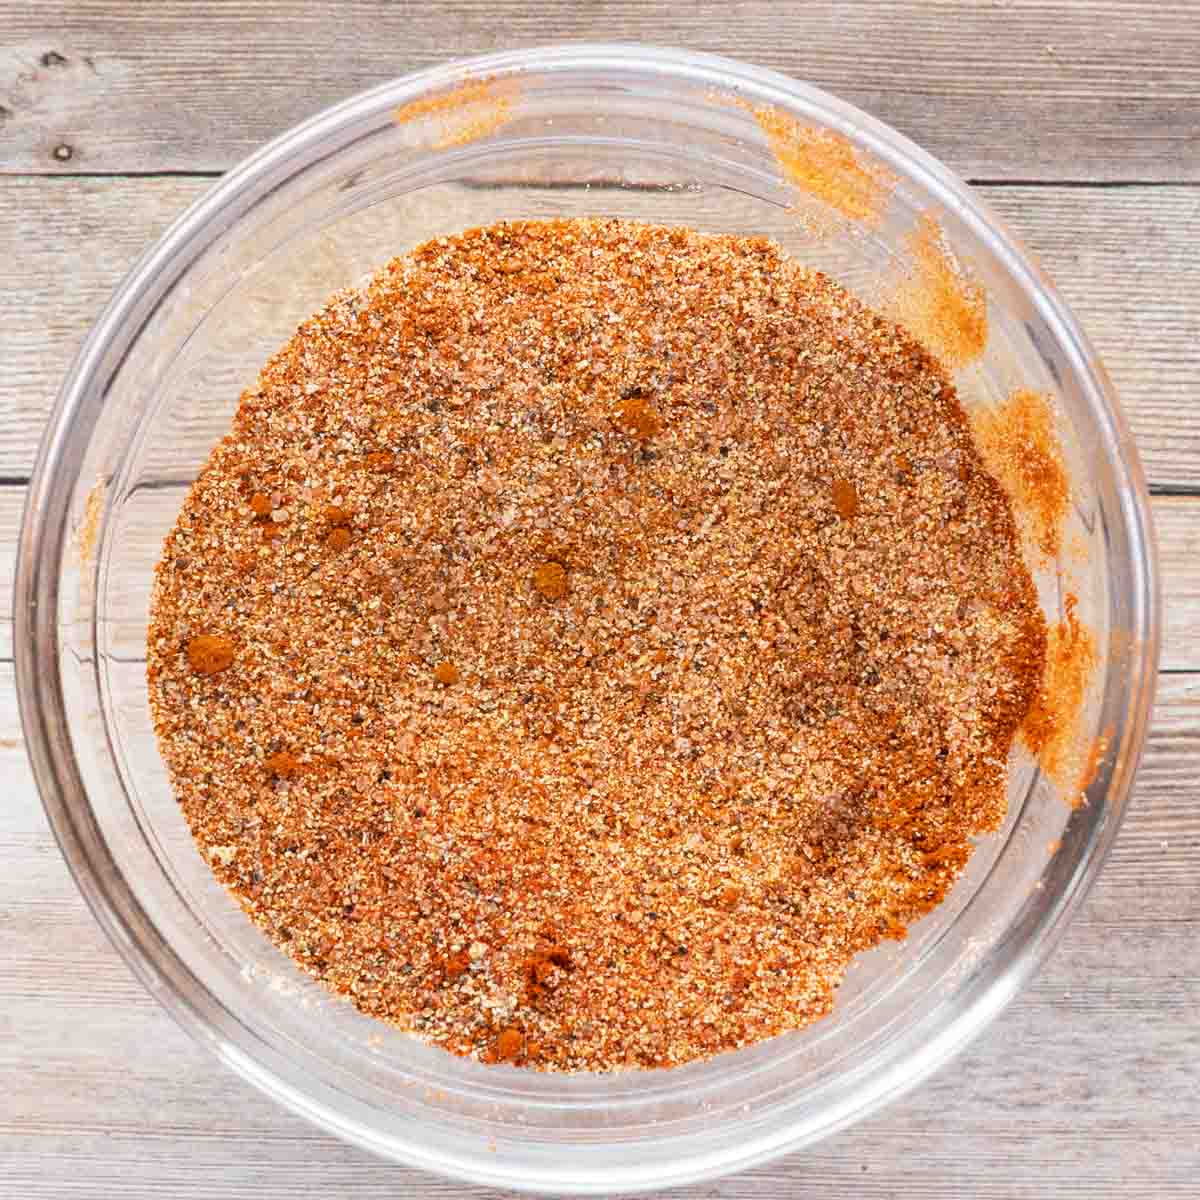 blended spices in a small glass bowl